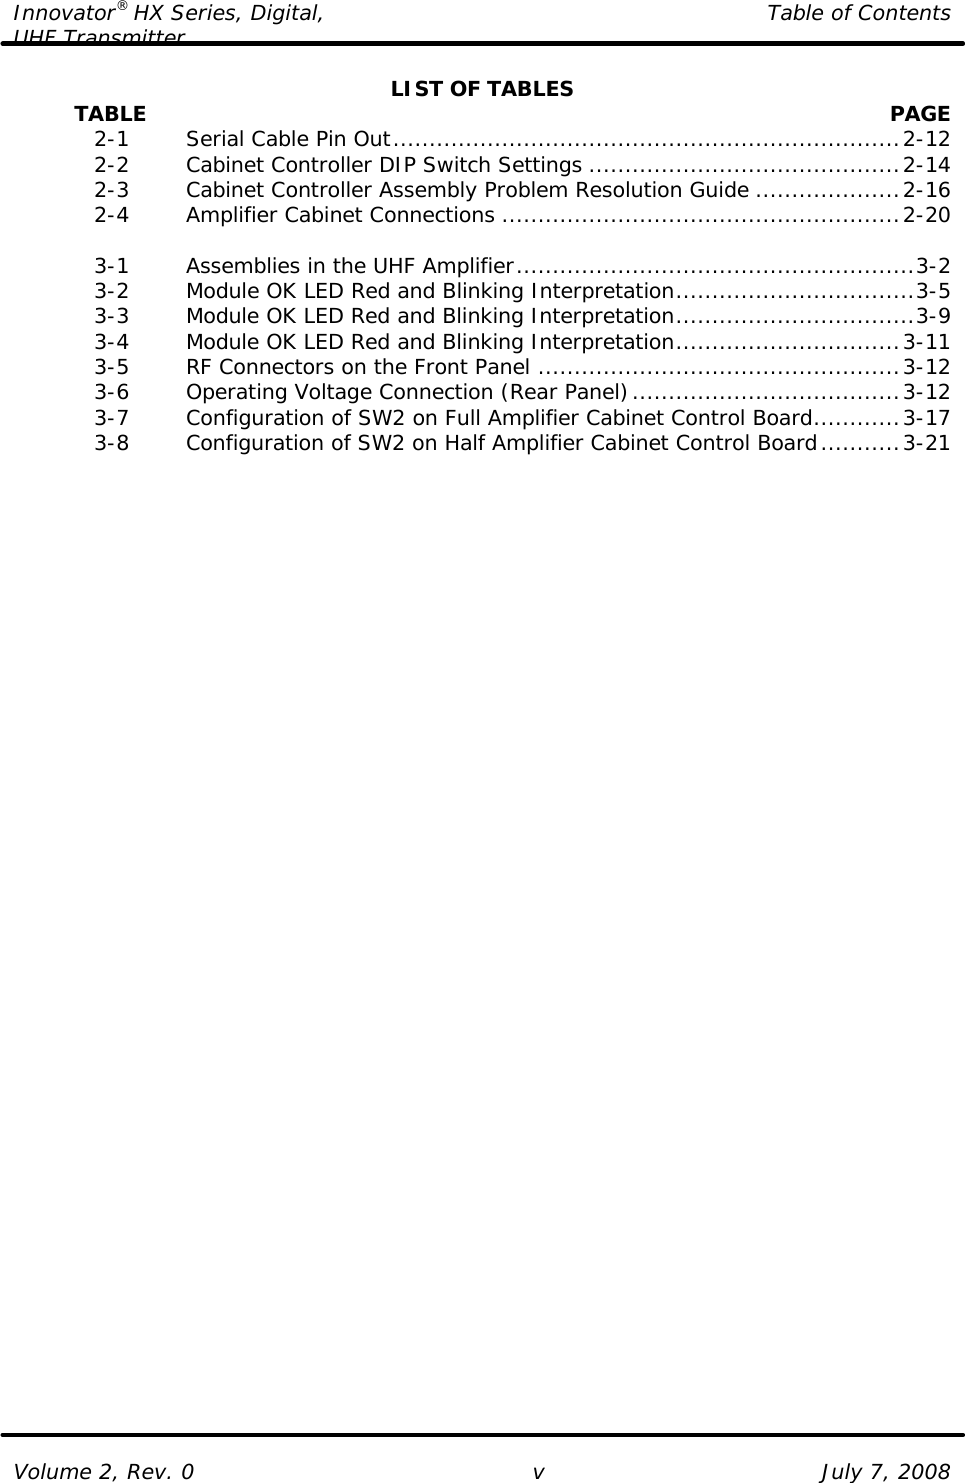 Innovator® HX Series, Digital, Table of Contents UHF Transmitter  Volume 2, Rev. 0 v July 7, 2008 LIST OF TABLES          TABLE    PAGE  2-1   Serial Cable Pin Out......................................................................2-12  2-2   Cabinet Controller DIP Switch Settings ...........................................2-14  2-3   Cabinet Controller Assembly Problem Resolution Guide ....................2-16  2-4   Amplifier Cabinet Connections .......................................................2-20   3-1   Assemblies in the UHF Amplifier.......................................................3-2  3-2   Module OK LED Red and Blinking Interpretation.................................3-5  3-3   Module OK LED Red and Blinking Interpretation.................................3-9  3-4   Module OK LED Red and Blinking Interpretation...............................3-11  3-5   RF Connectors on the Front Panel ..................................................3-12  3-6   Operating Voltage Connection (Rear Panel).....................................3-12  3-7   Configuration of SW2 on Full Amplifier Cabinet Control Board............3-17  3-8   Configuration of SW2 on Half Amplifier Cabinet Control Board...........3-21  